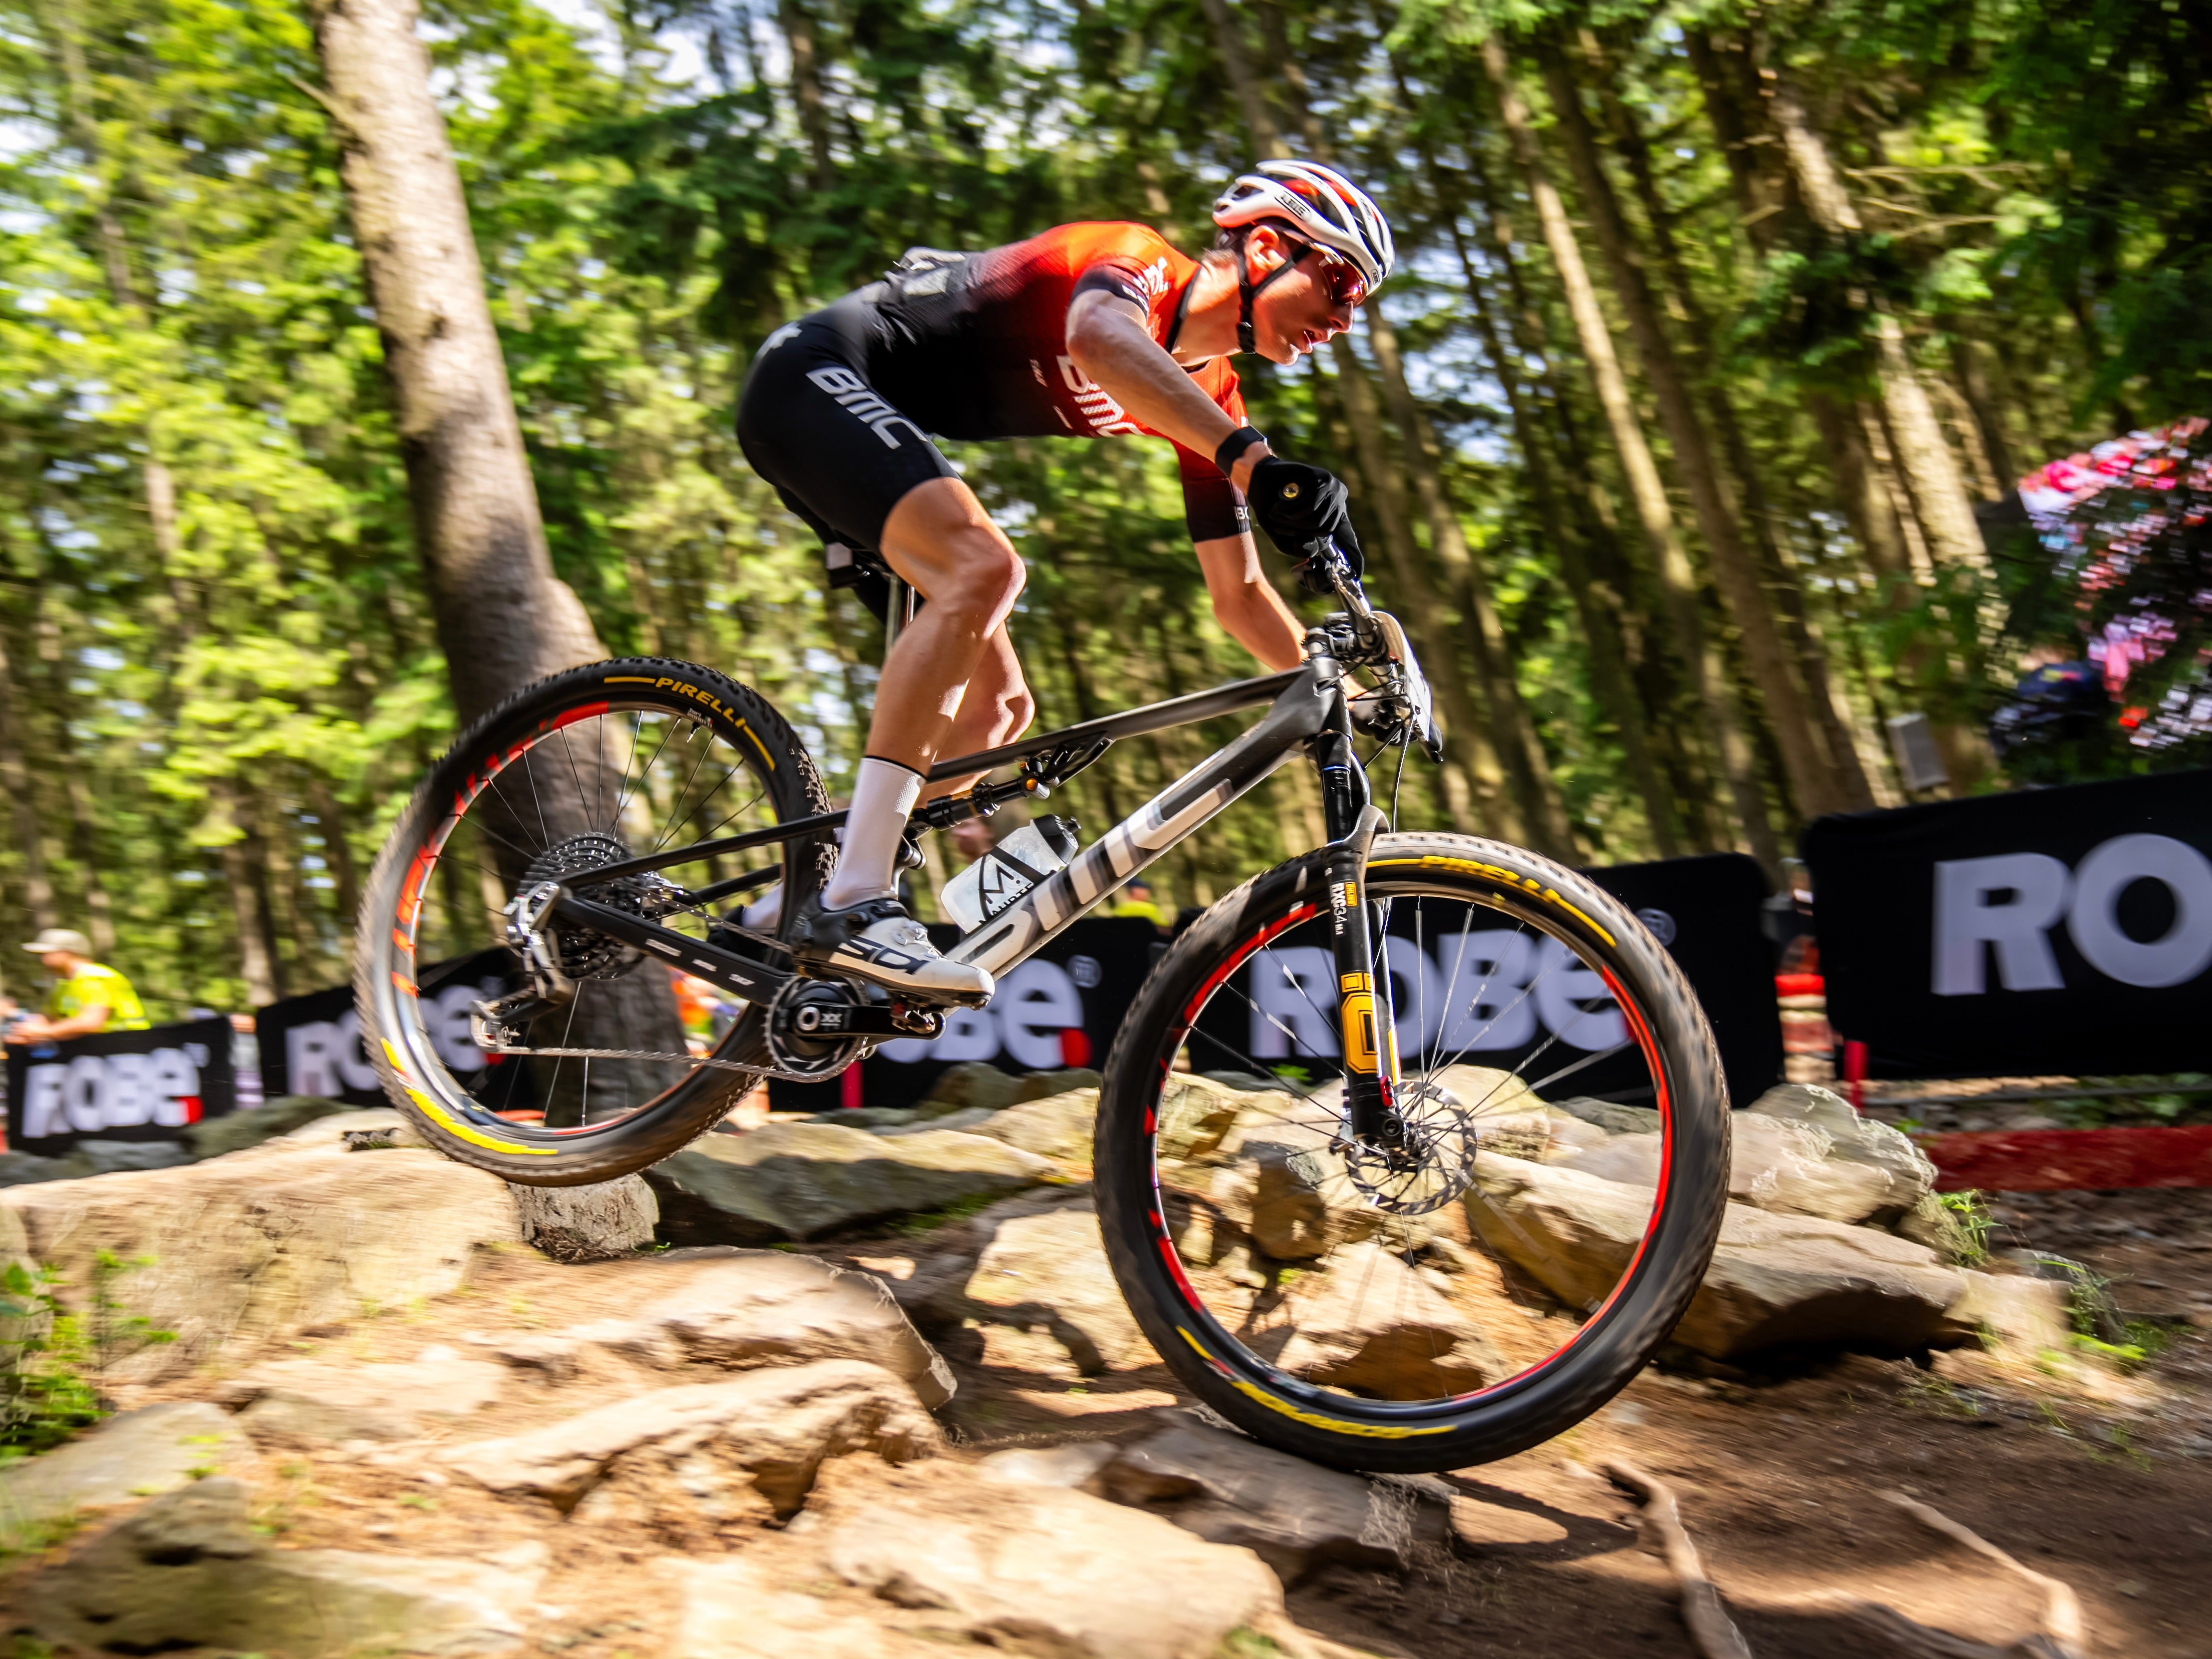 Zanotti shines for Team BMC in third World Cup of the season